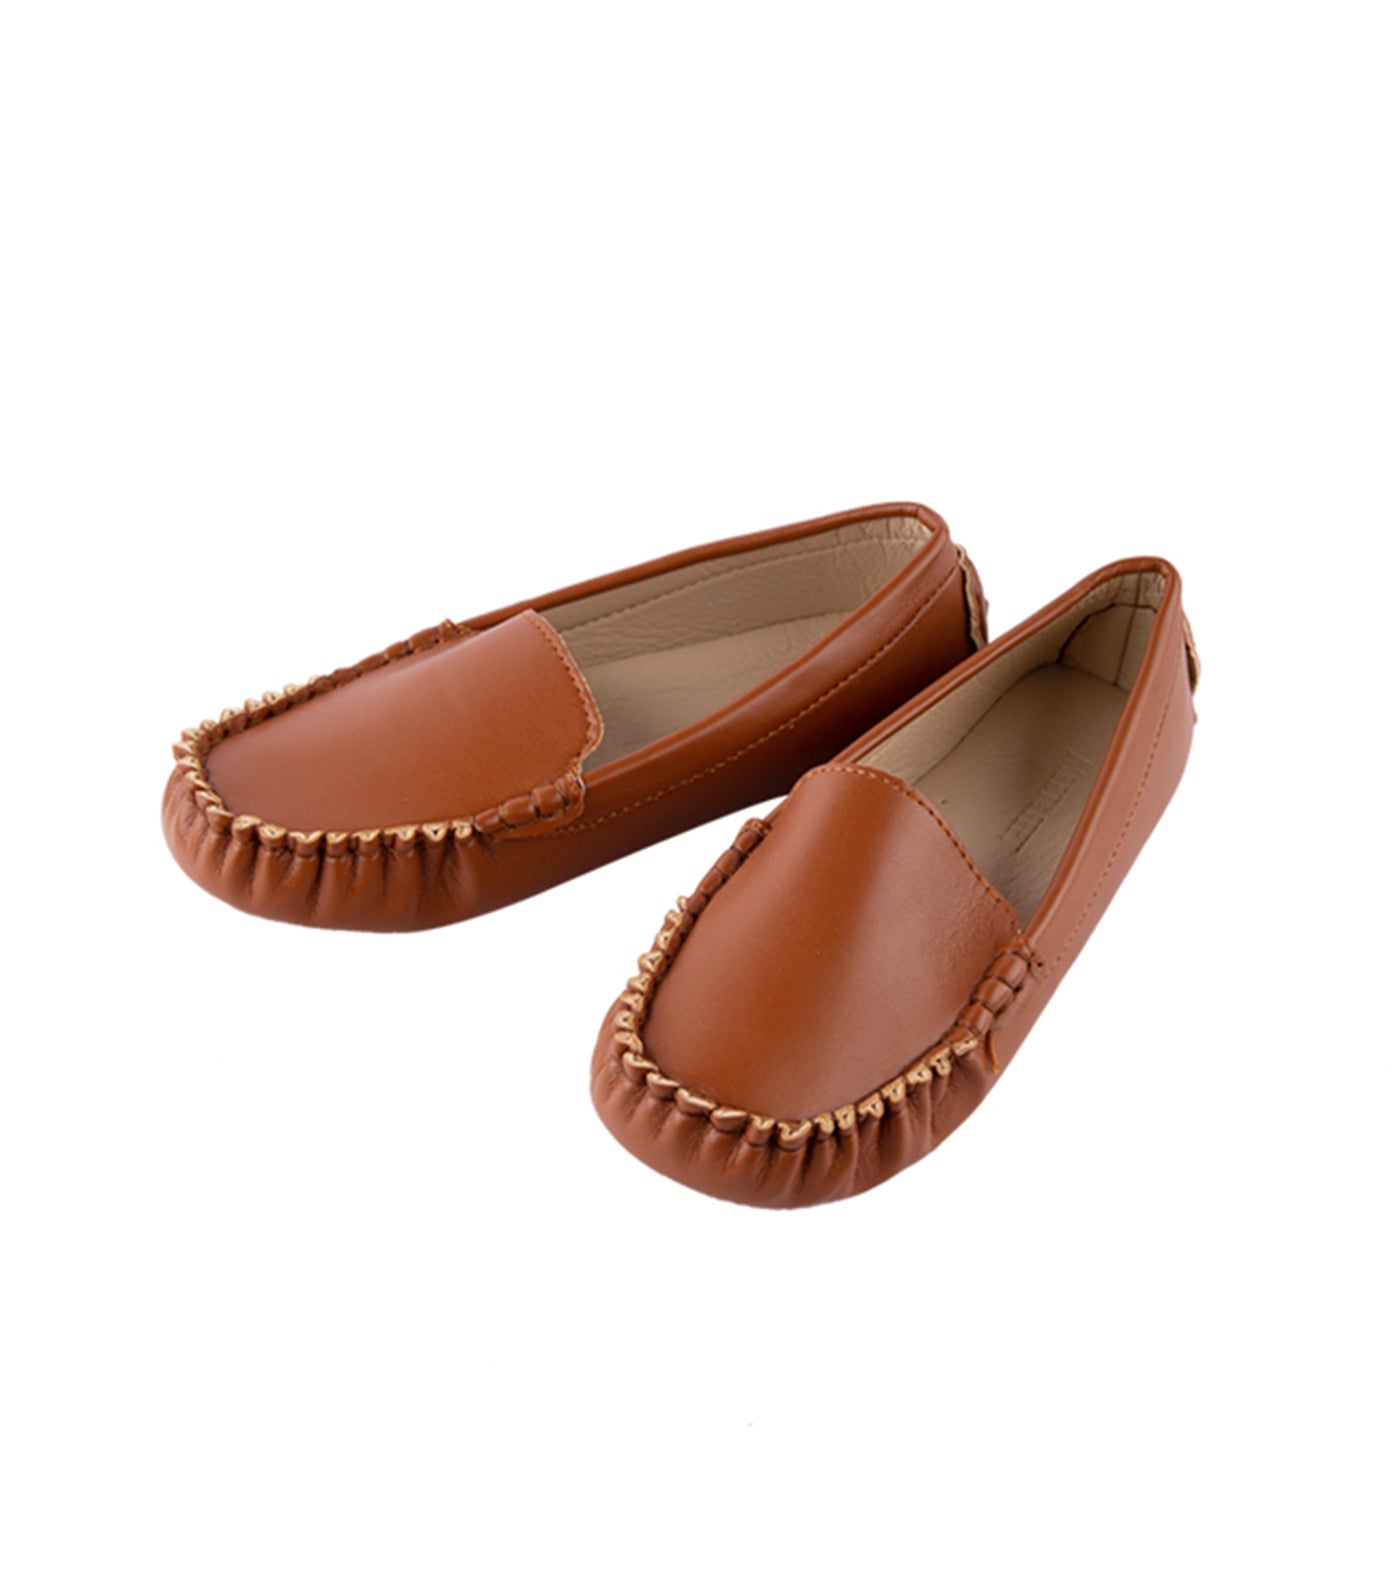 Seth Kids Loafers for Boys - Tan